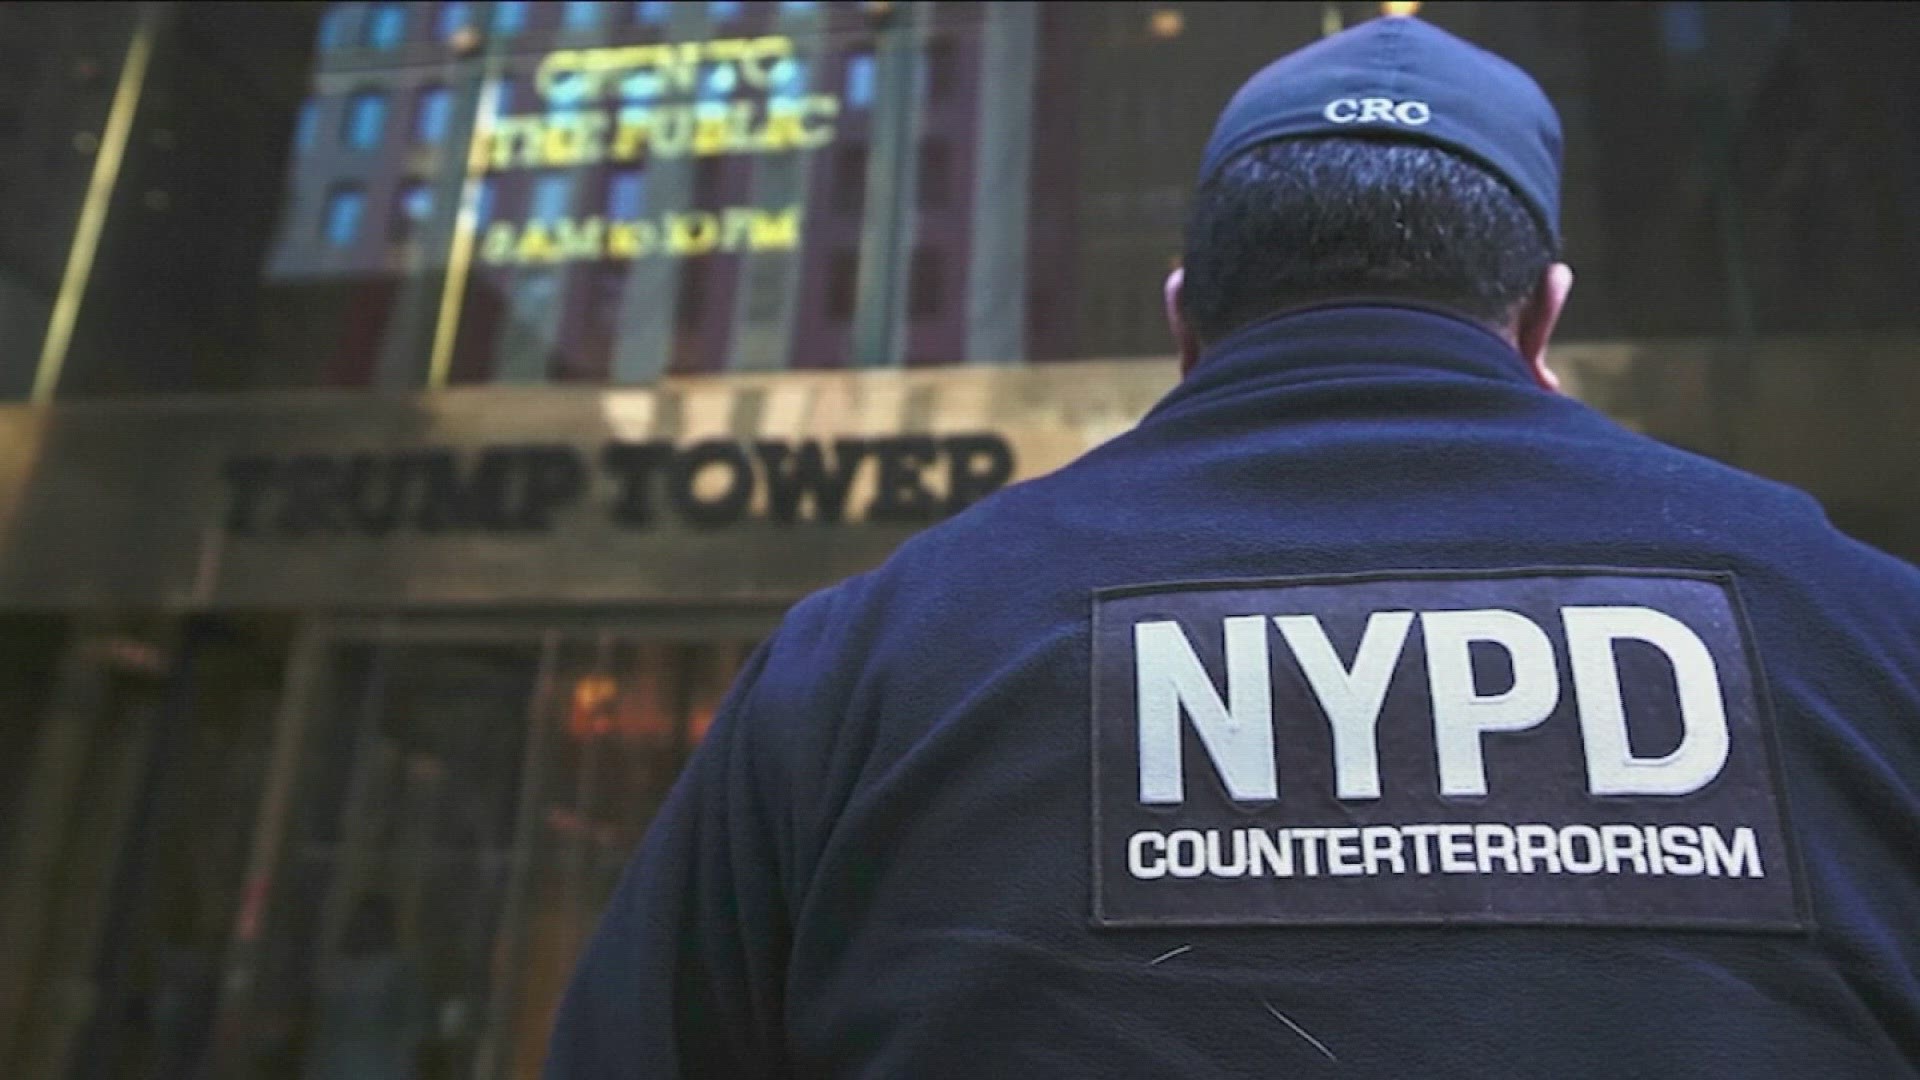 The NYPD is out in full force on Friday, with officers preparing for potential unrest.